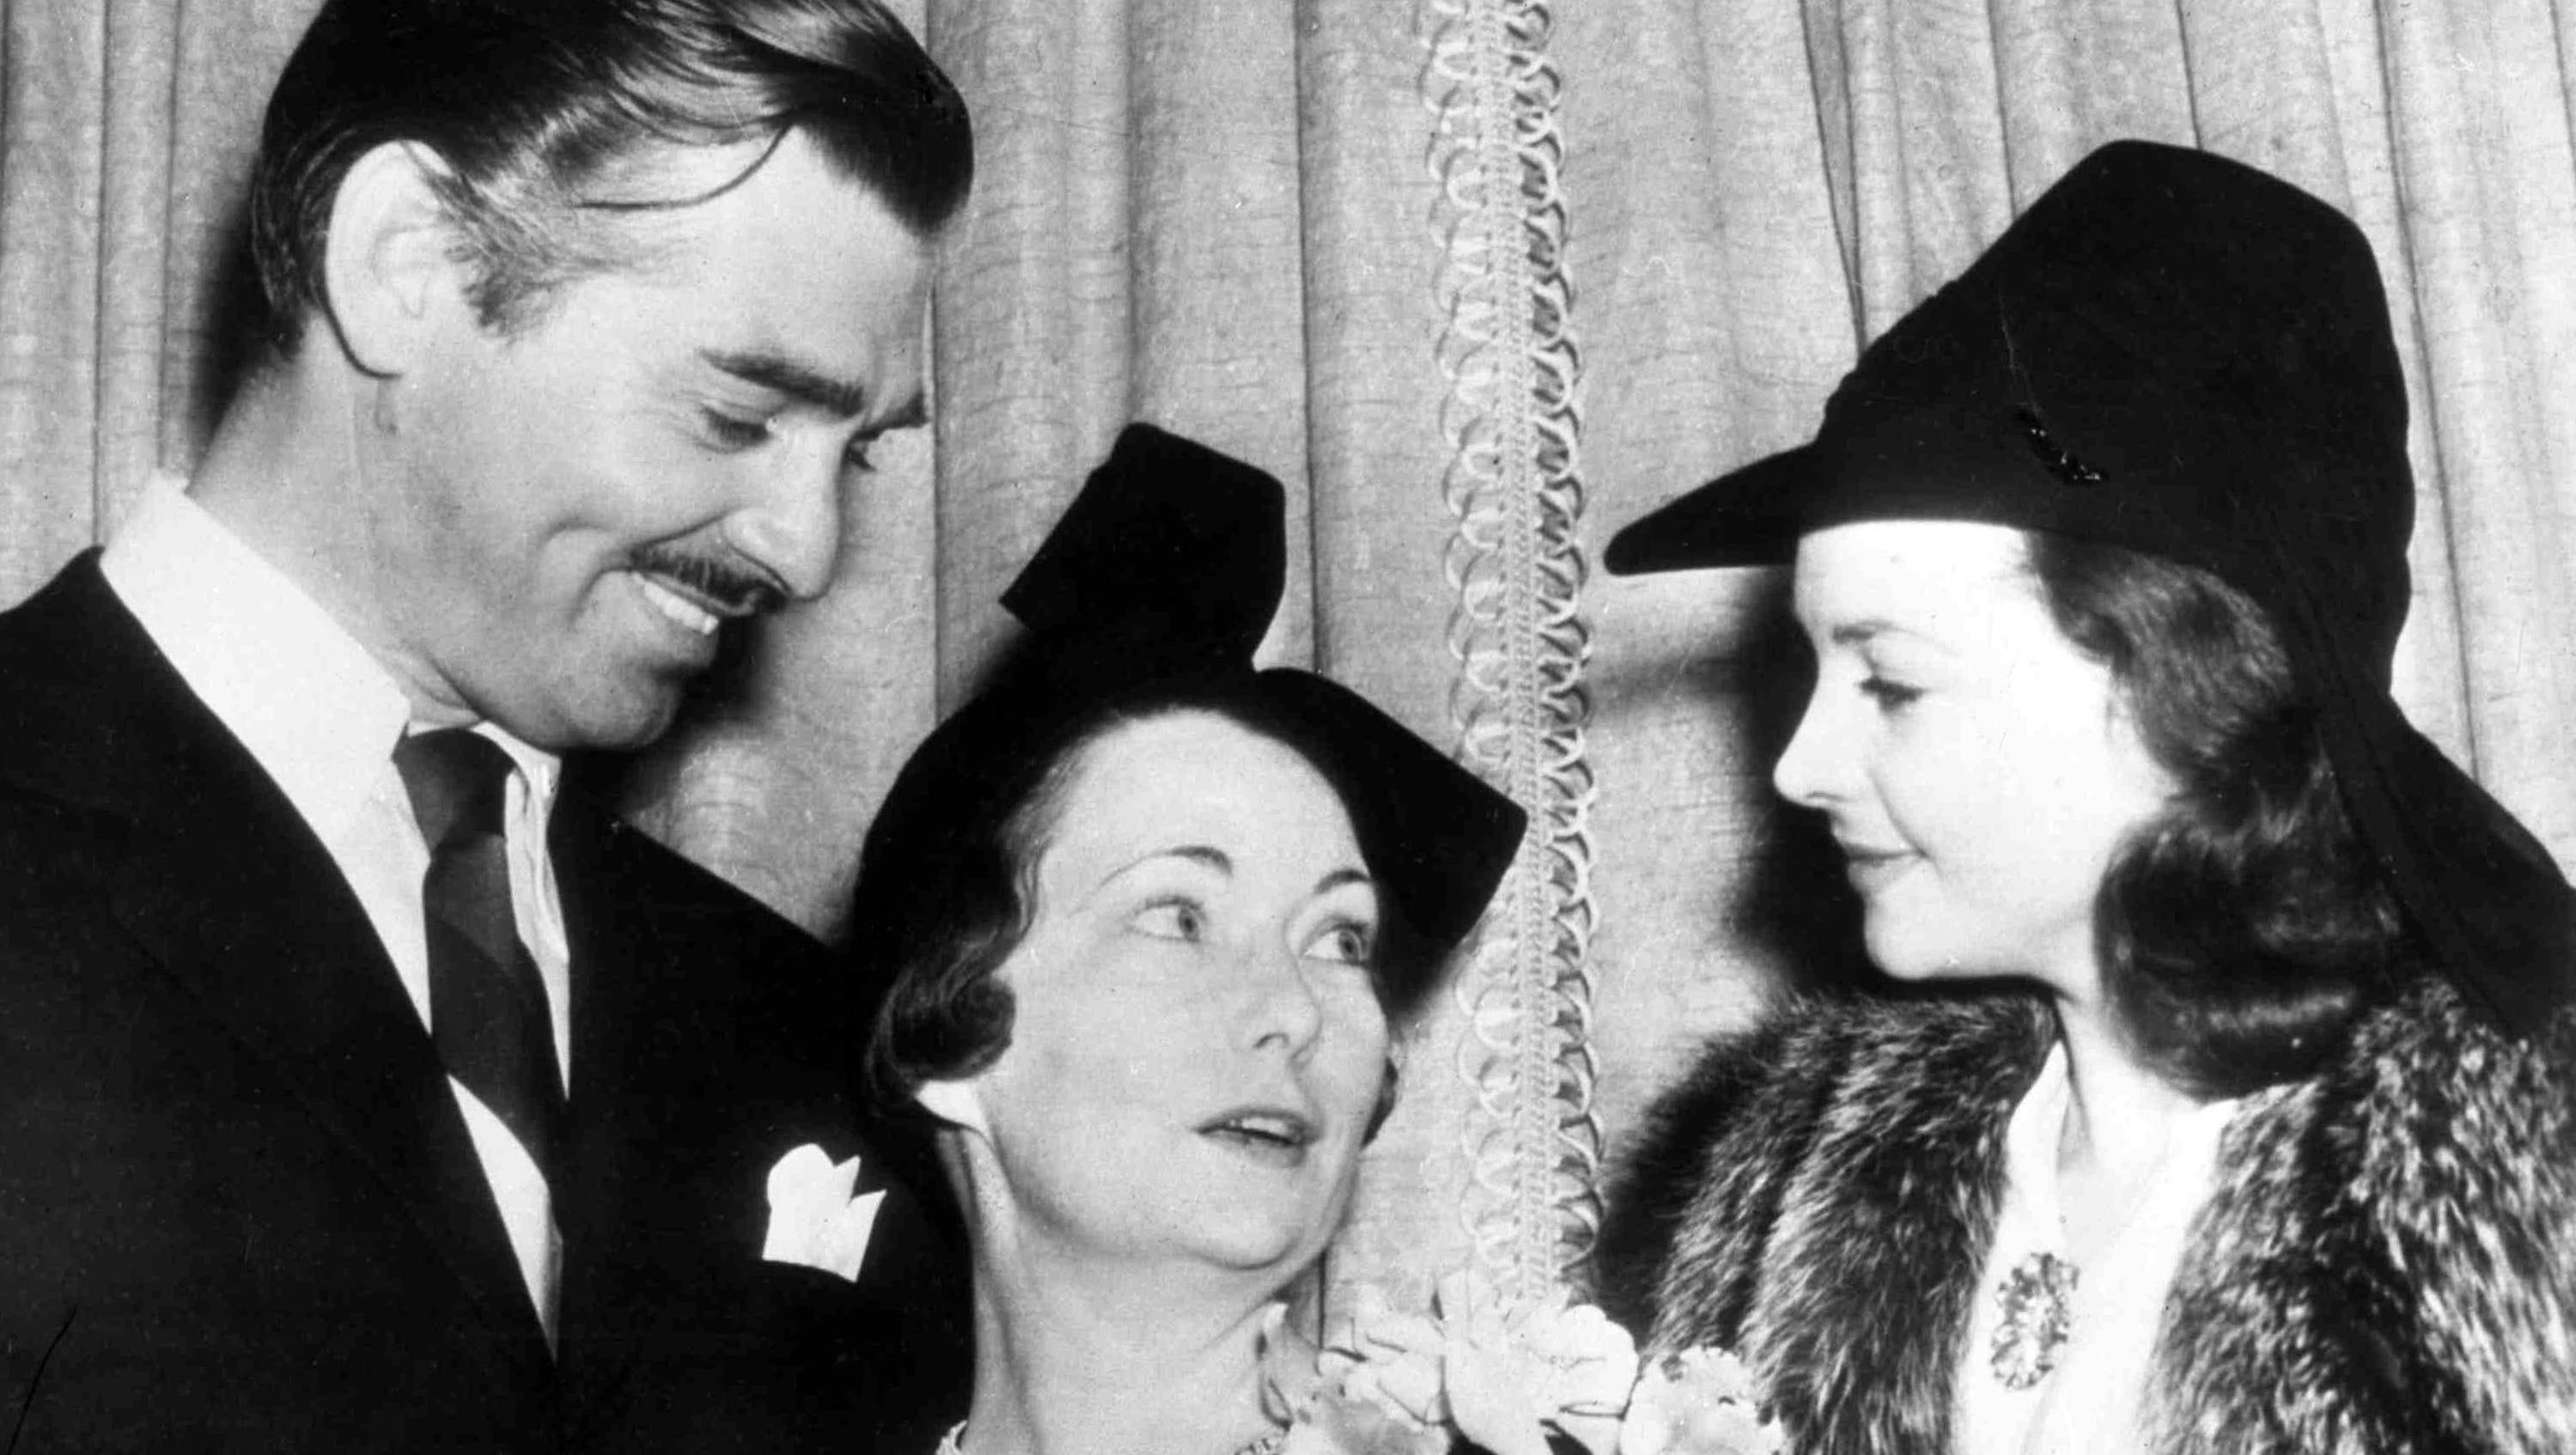 Mitchell flanked by GWTW stars Clark Gable and Vivien Leigh.